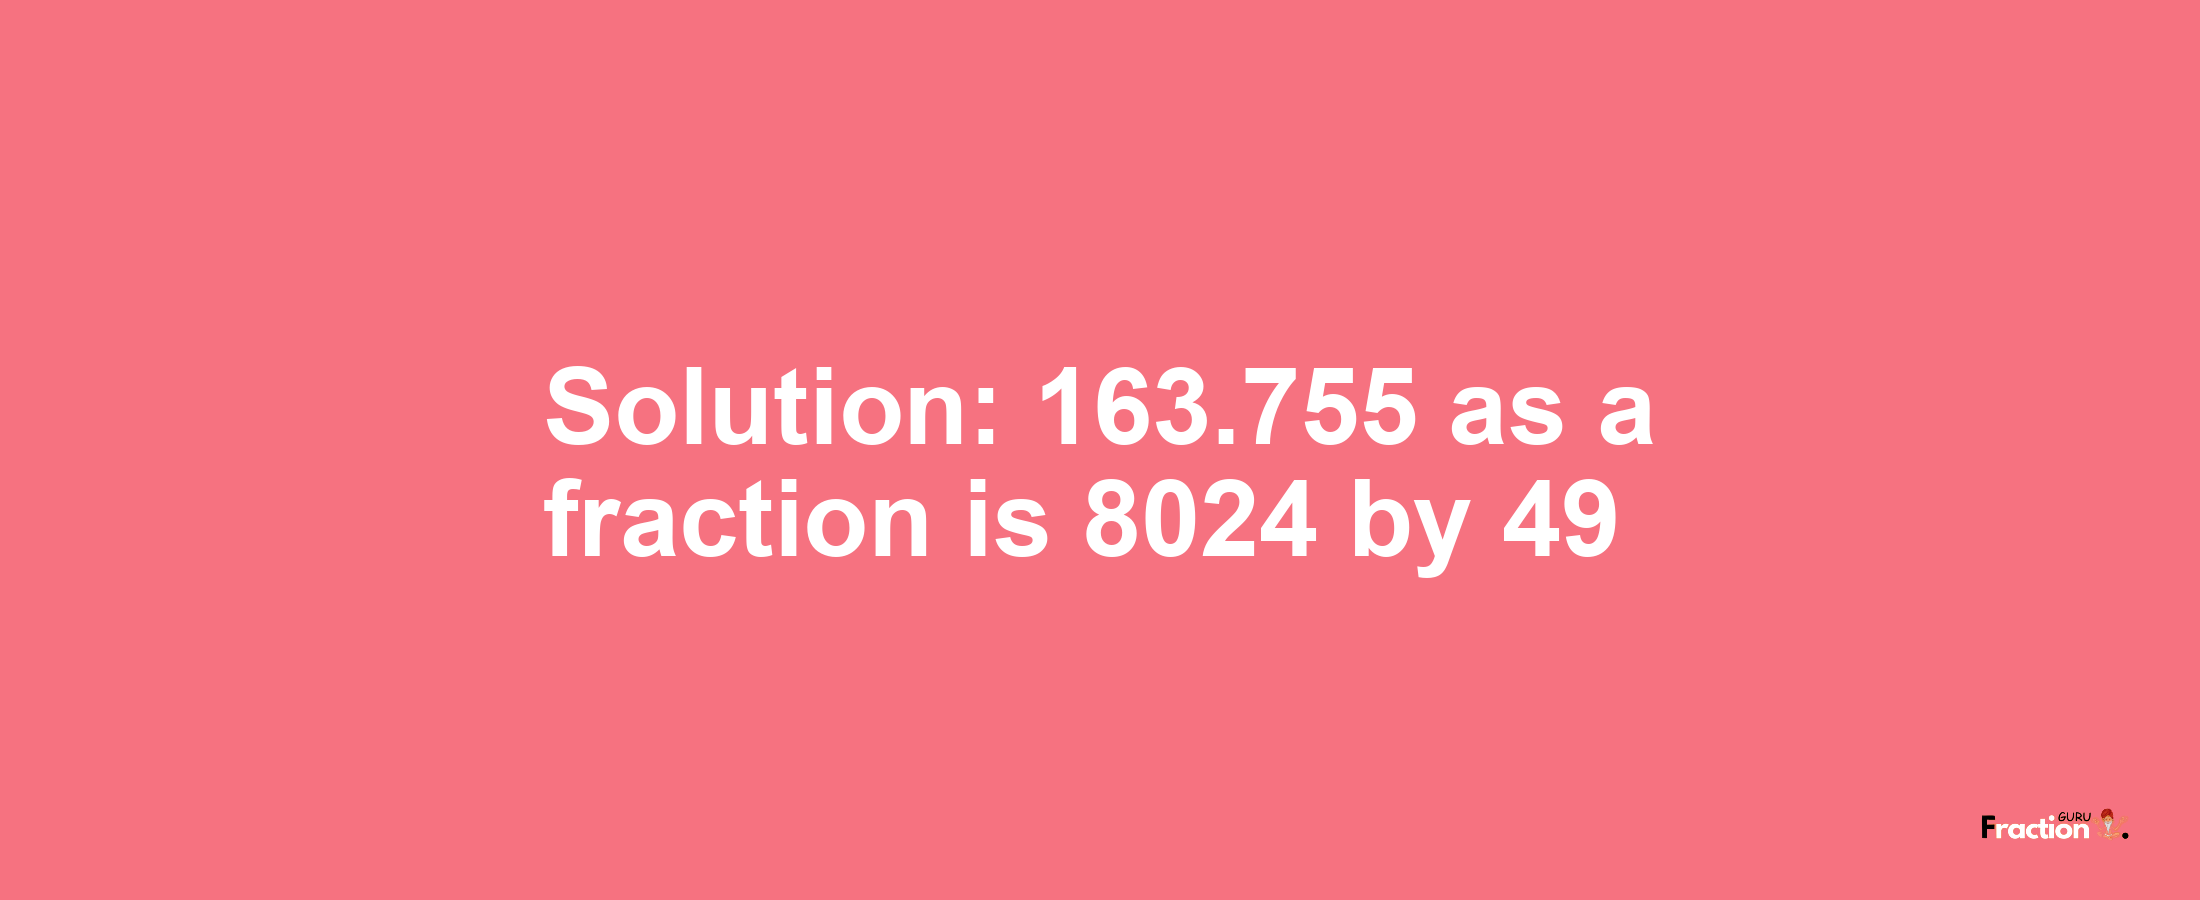 Solution:163.755 as a fraction is 8024/49